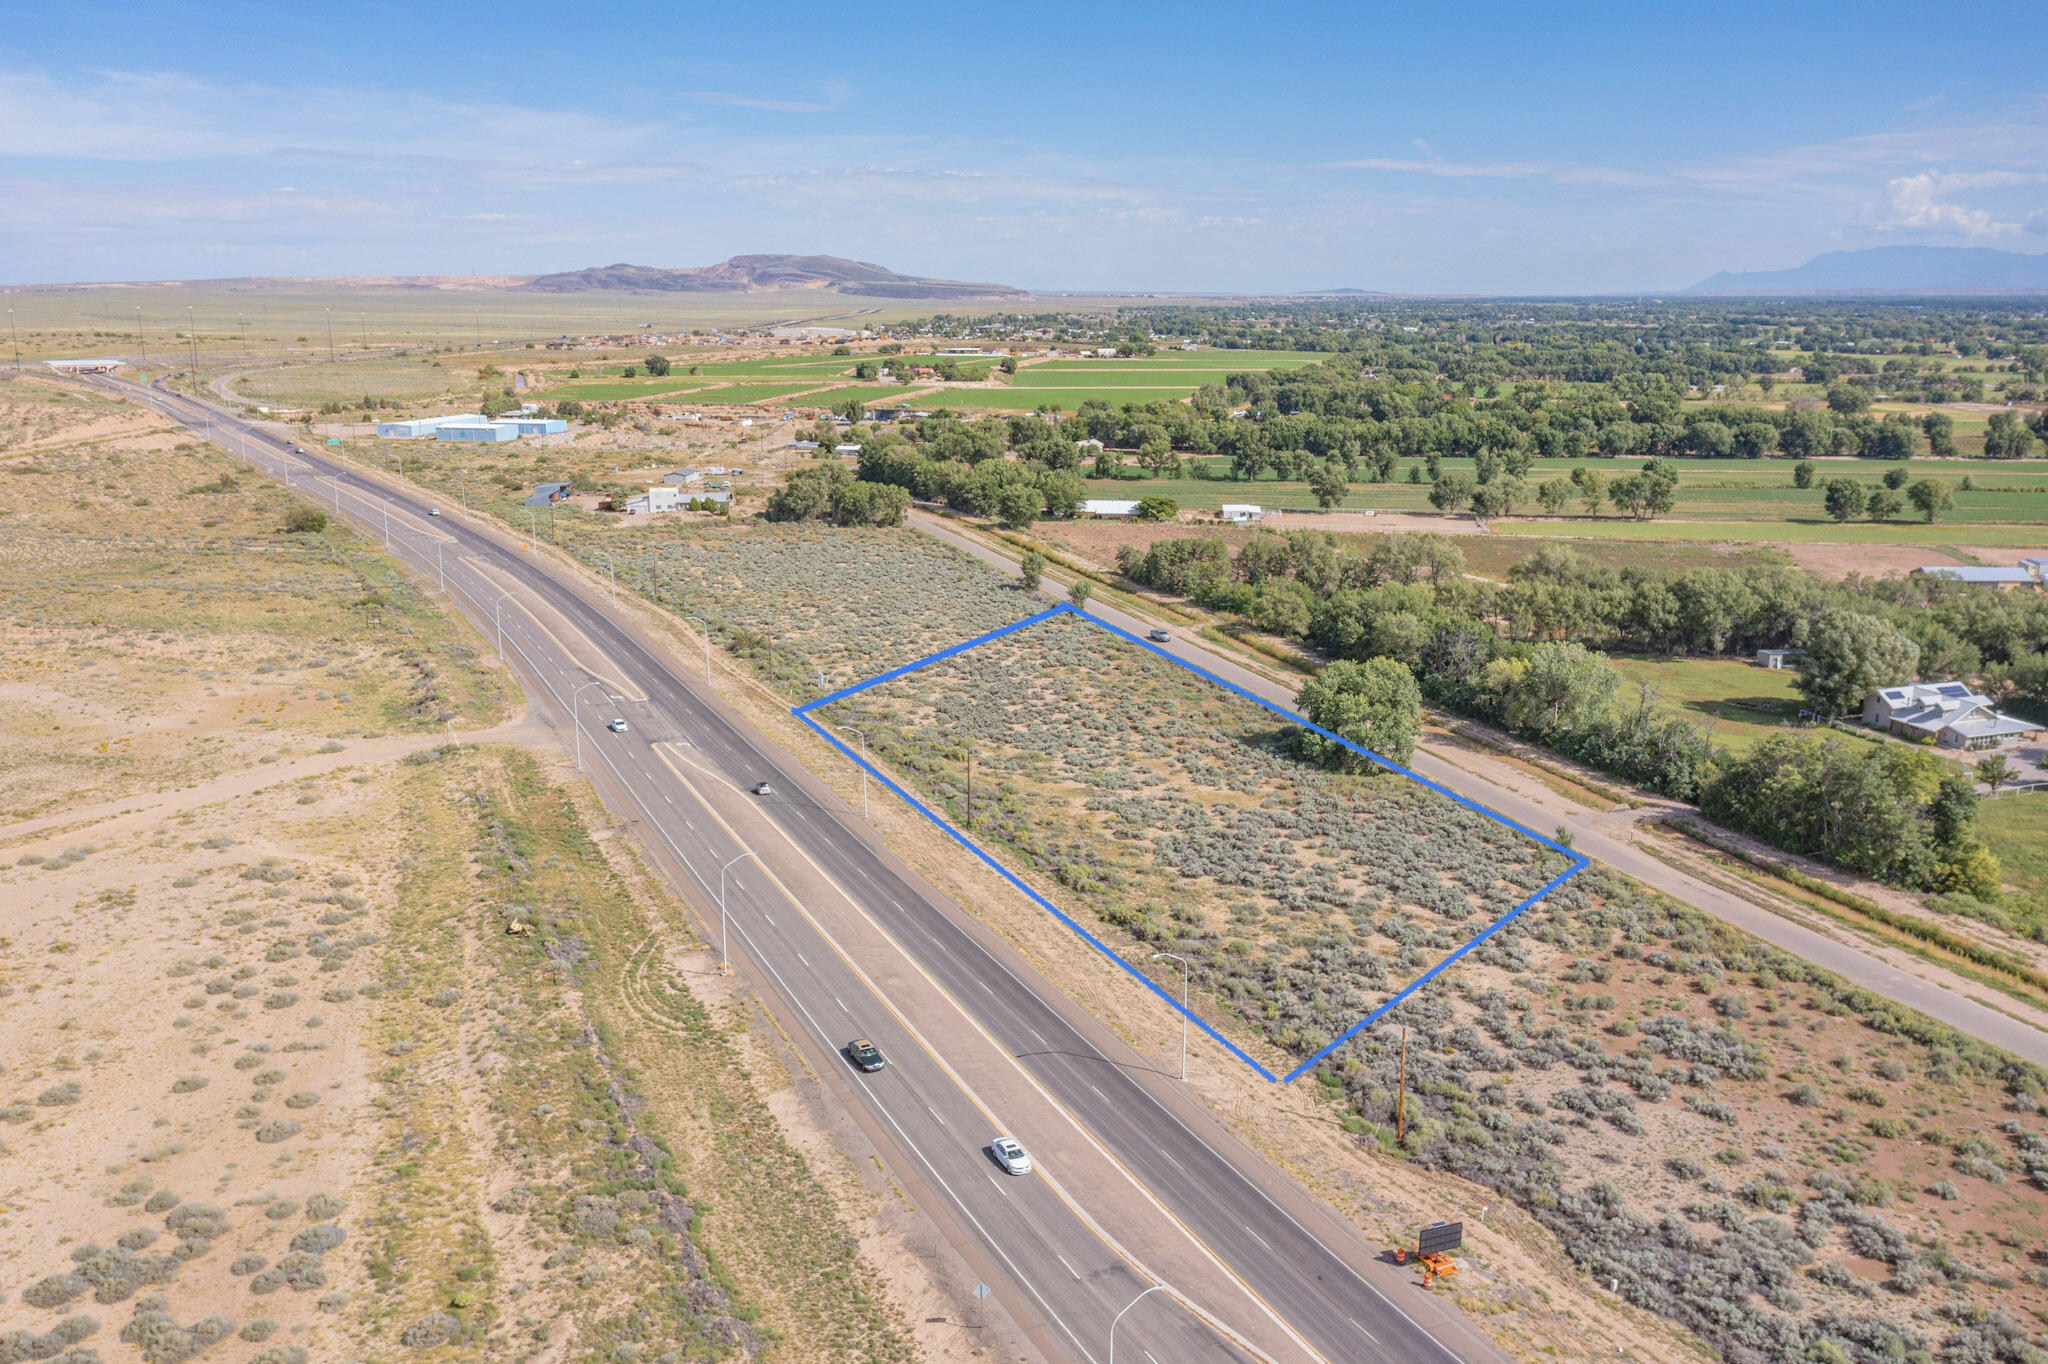 0 1-25 Bypass, Belen, New Mexico 87002, ,Land,For Sale,0 1-25 Bypass,1001954